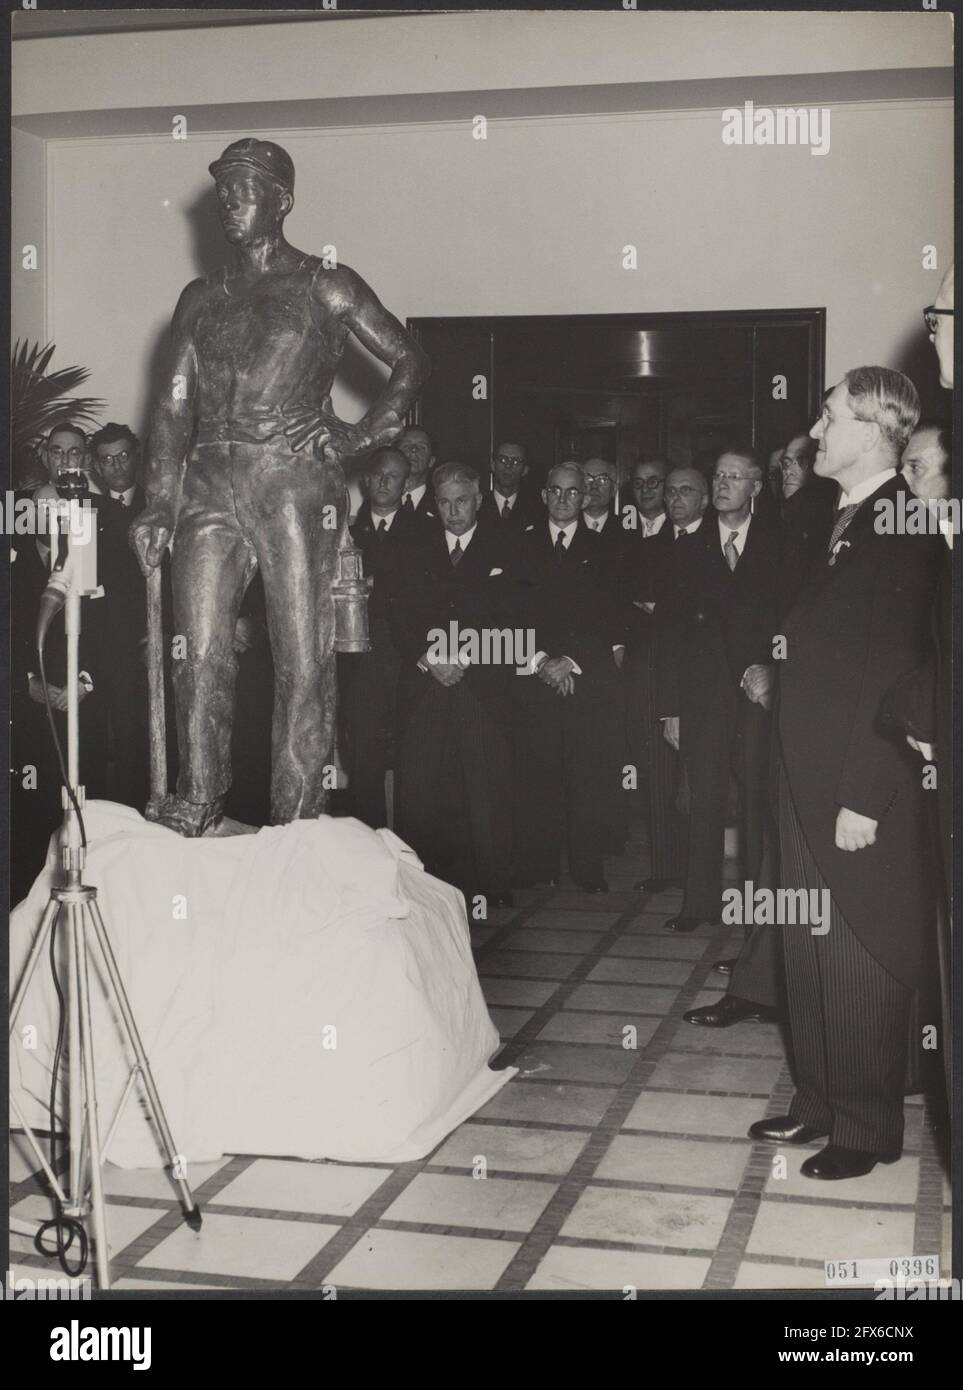 The Golden Jubilee of the State Mines in Limburg. A statue, representing a miner, was offered by the mining personnel. The unveiling of the statue made by the sculptor Melis. On the right, Dr. Ch. Th. Groothoff (President), May 8, 1952, gifts, anniversaries, mines, statues, The Netherlands, 20th century press agency photo, news to remember, documentary, historic photography 1945-1990, visual stories, human history of the Twentieth Century, capturing moments in time Stock Photo